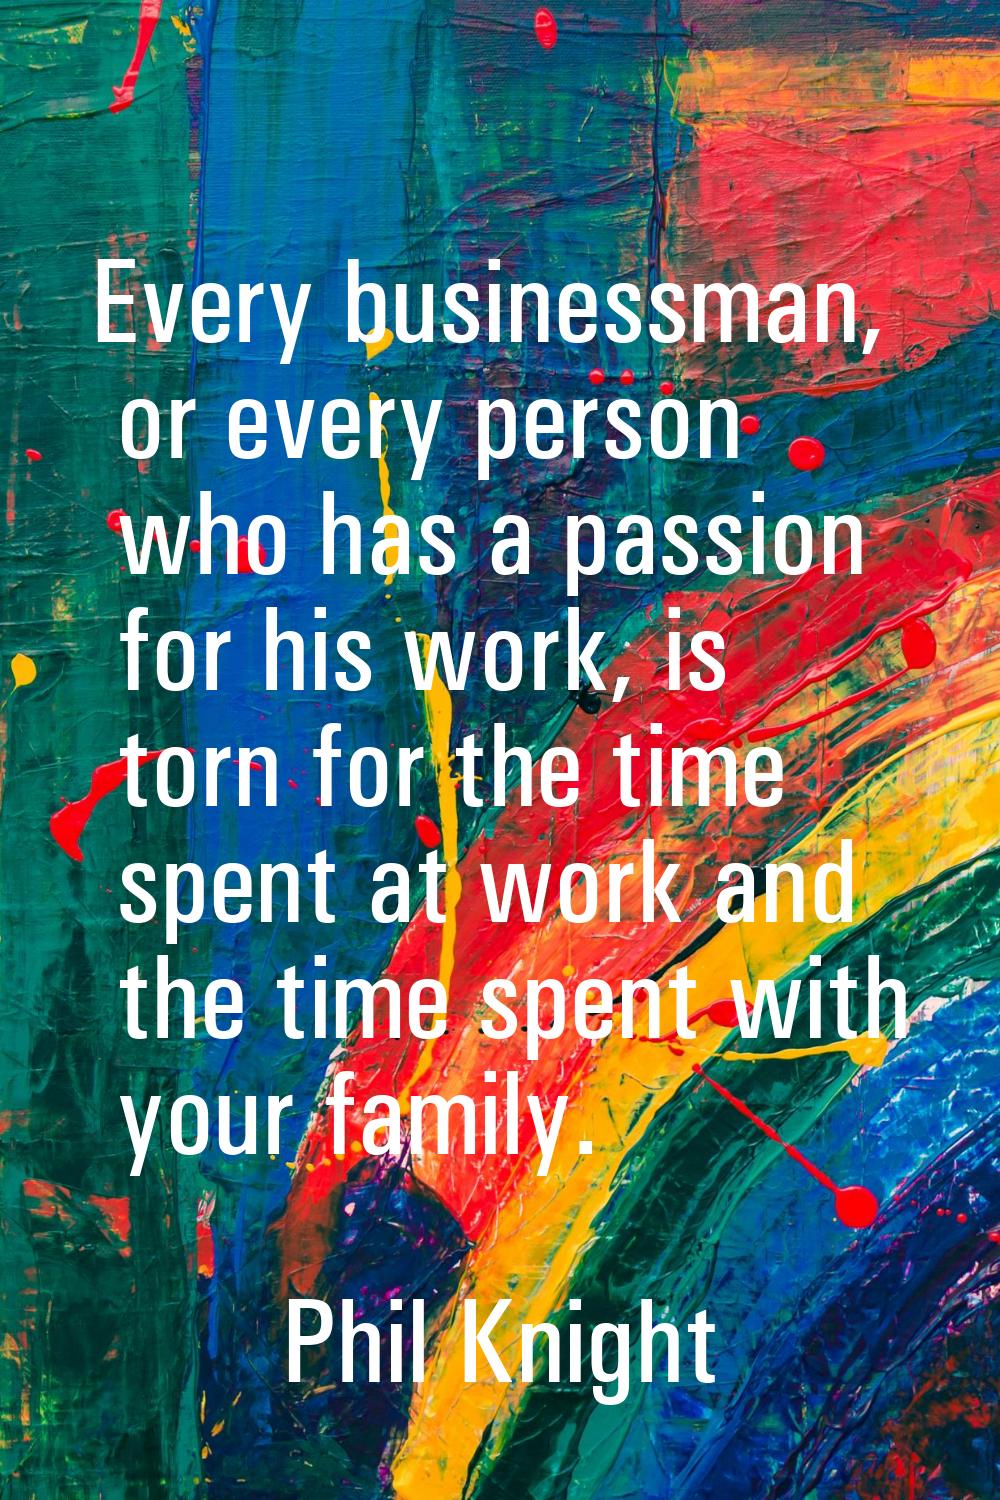 Every businessman, or every person who has a passion for his work, is torn for the time spent at wo